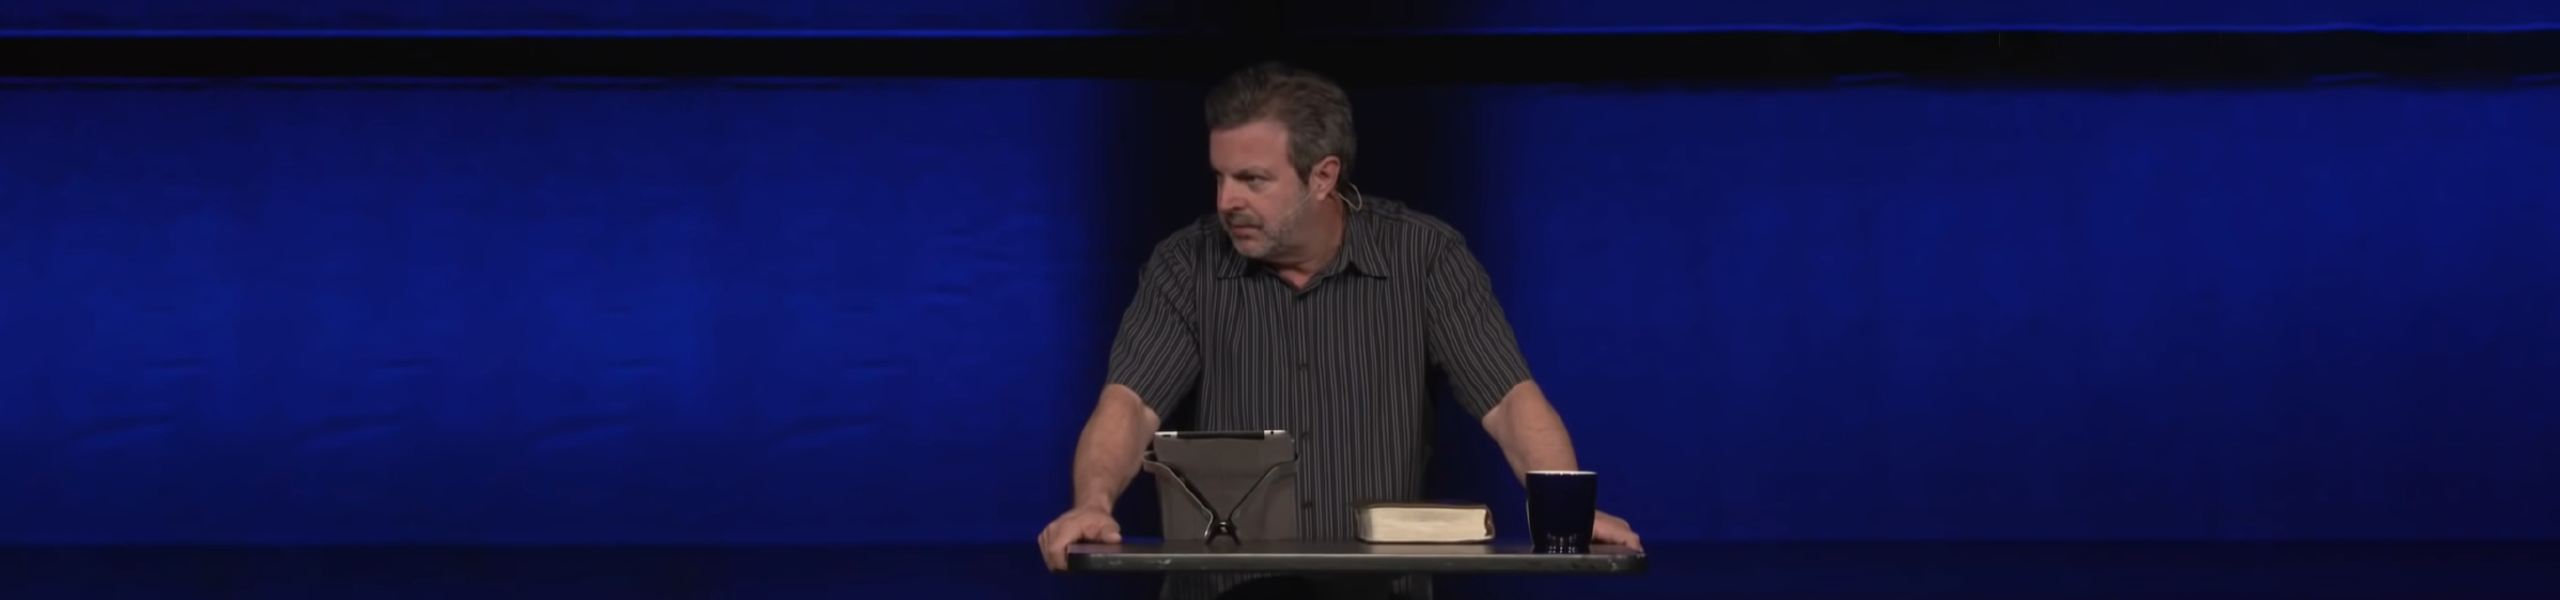 Spirit Wars: Winning the Invisible Battle Against Sin and the Enemy | Kris Vallotton